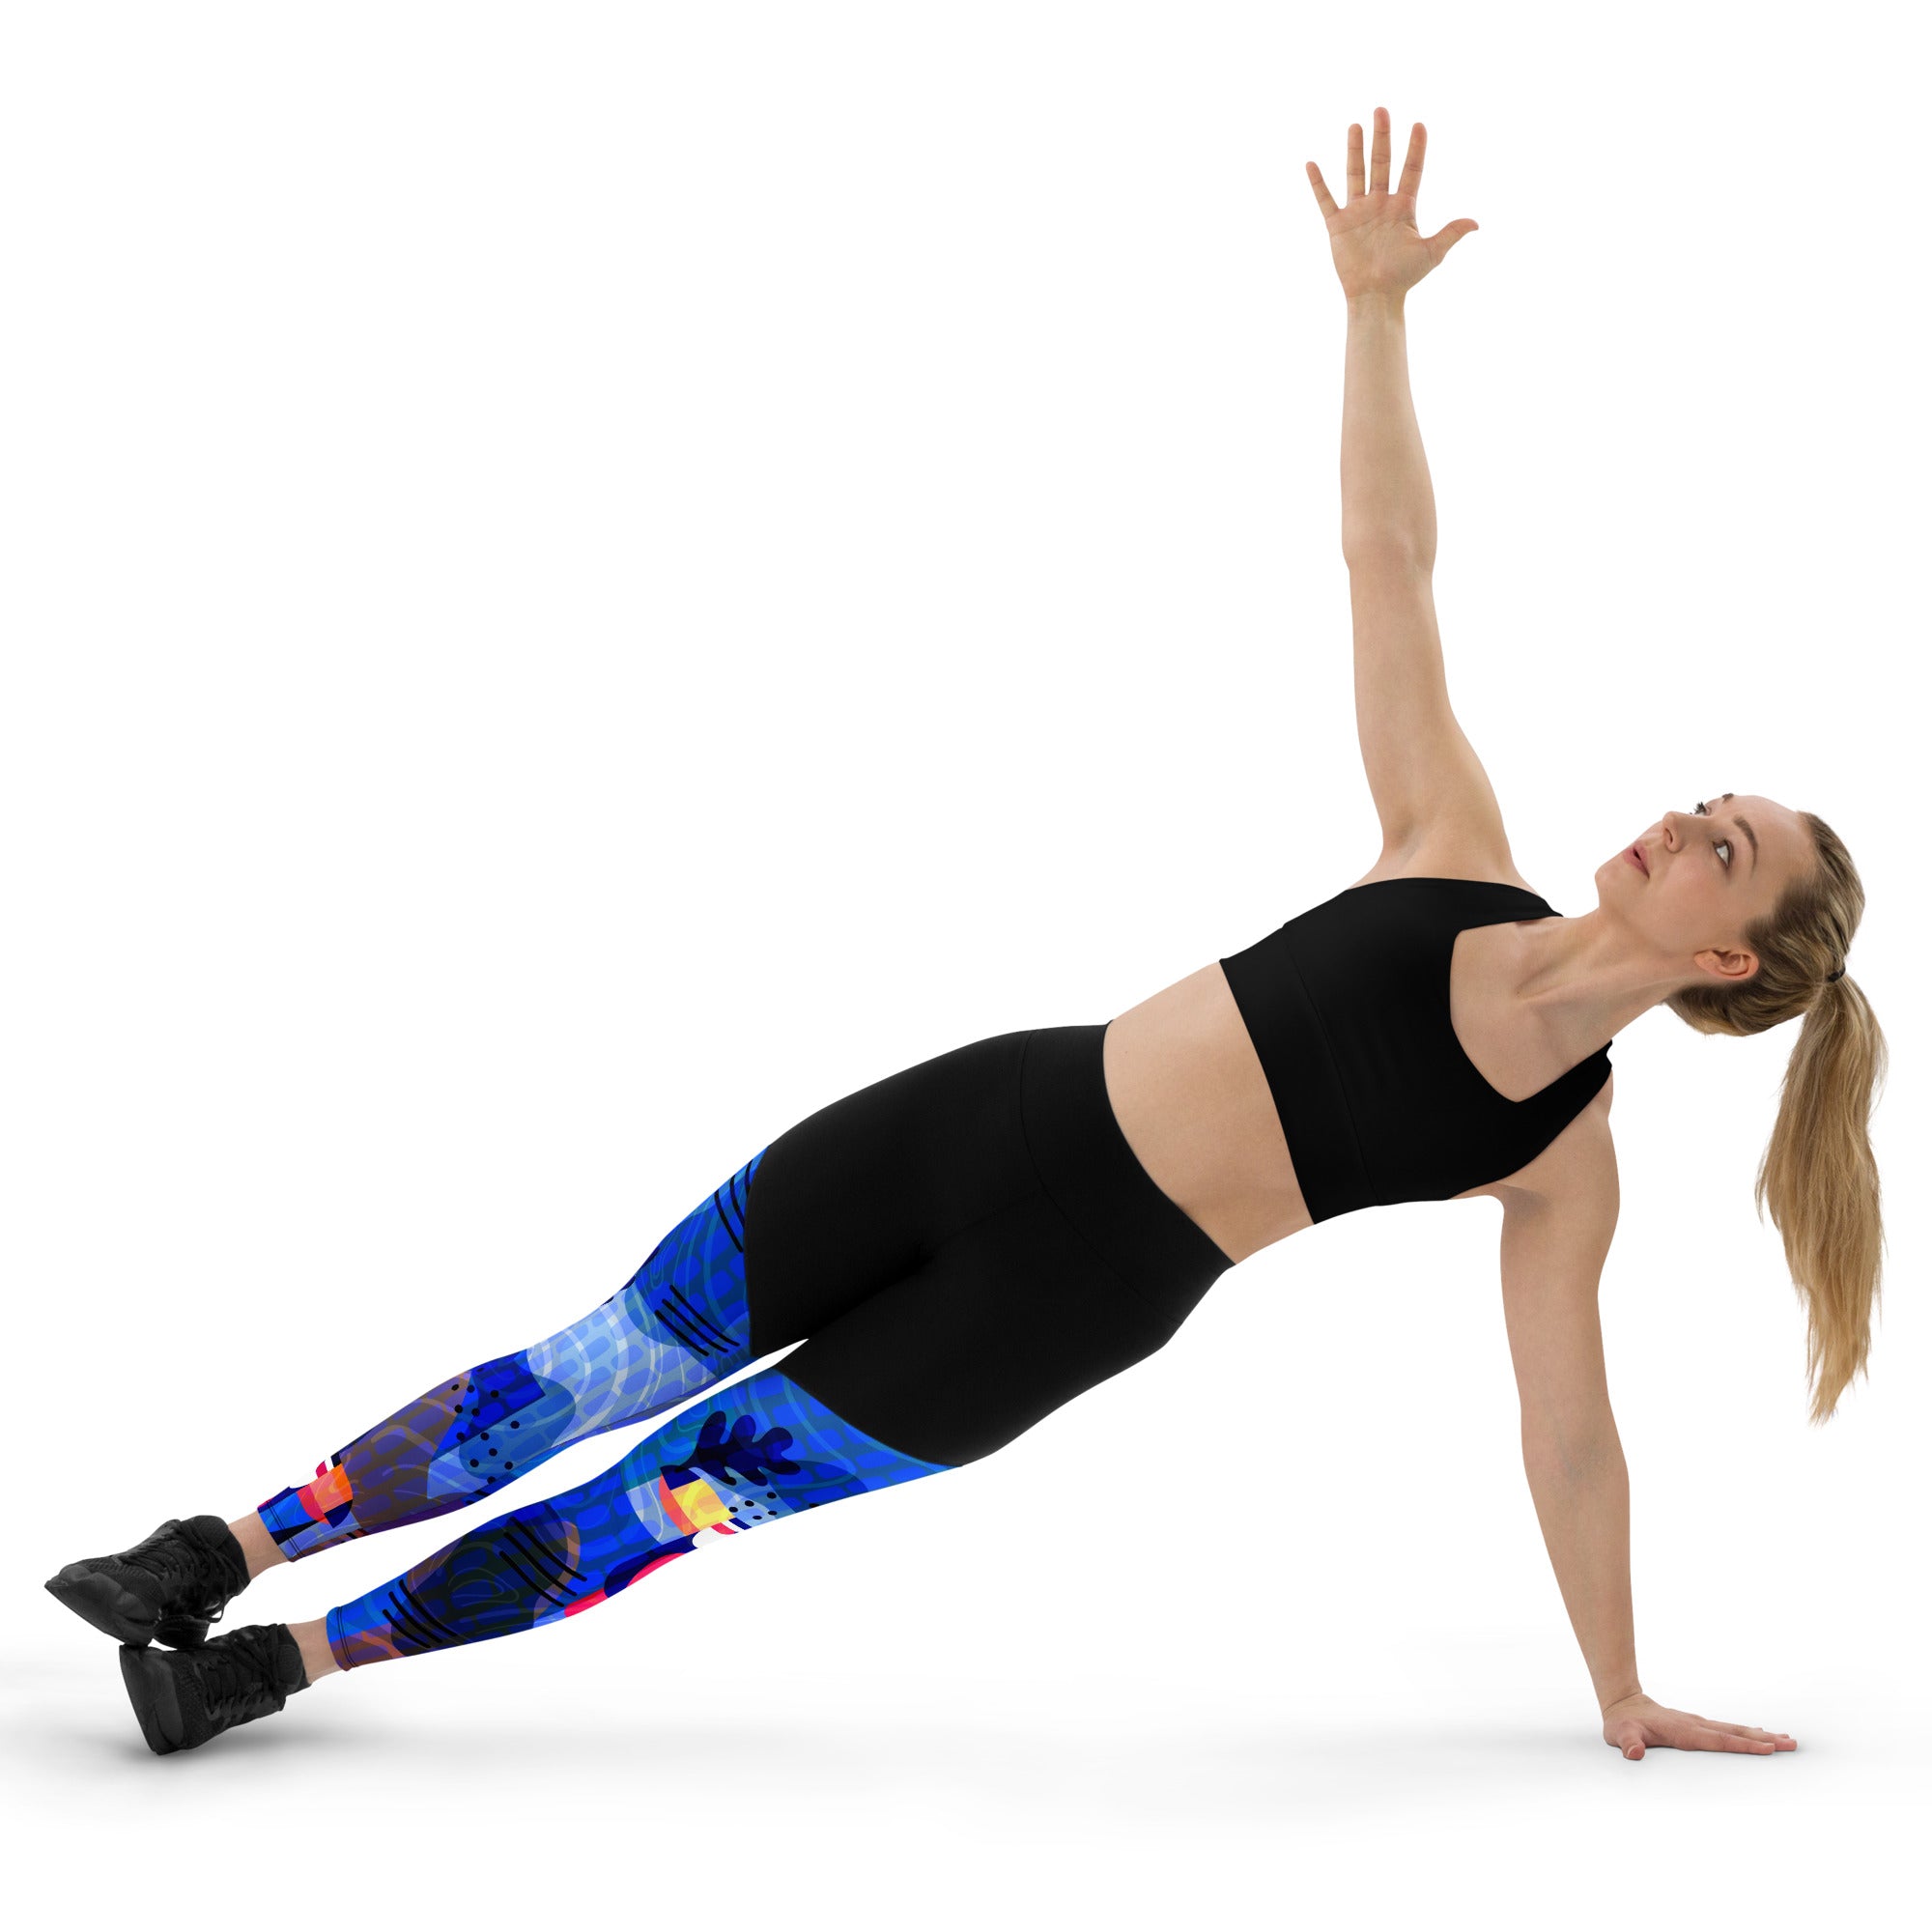 Blue Abstract Compression Leggings